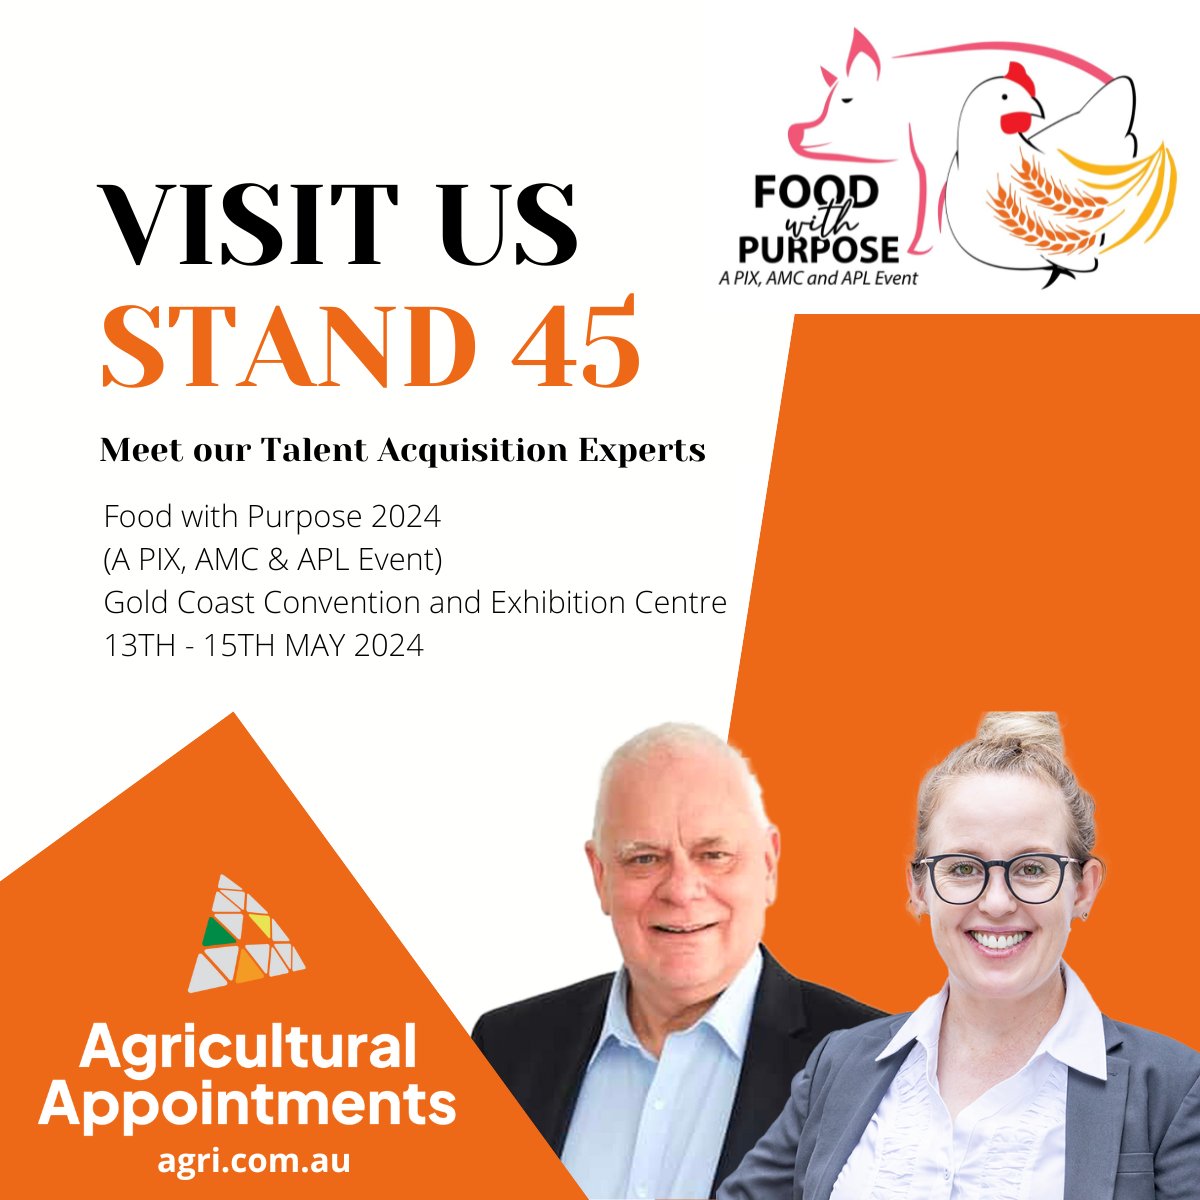 We're thrilled to be here at Food with Purpose 2024! Swing by Stand 45 and say hello!  #agjobs #seek #agchatoz #agriculture #farming #agribusiness #foodwithpurpose2024 #PIX #AMC